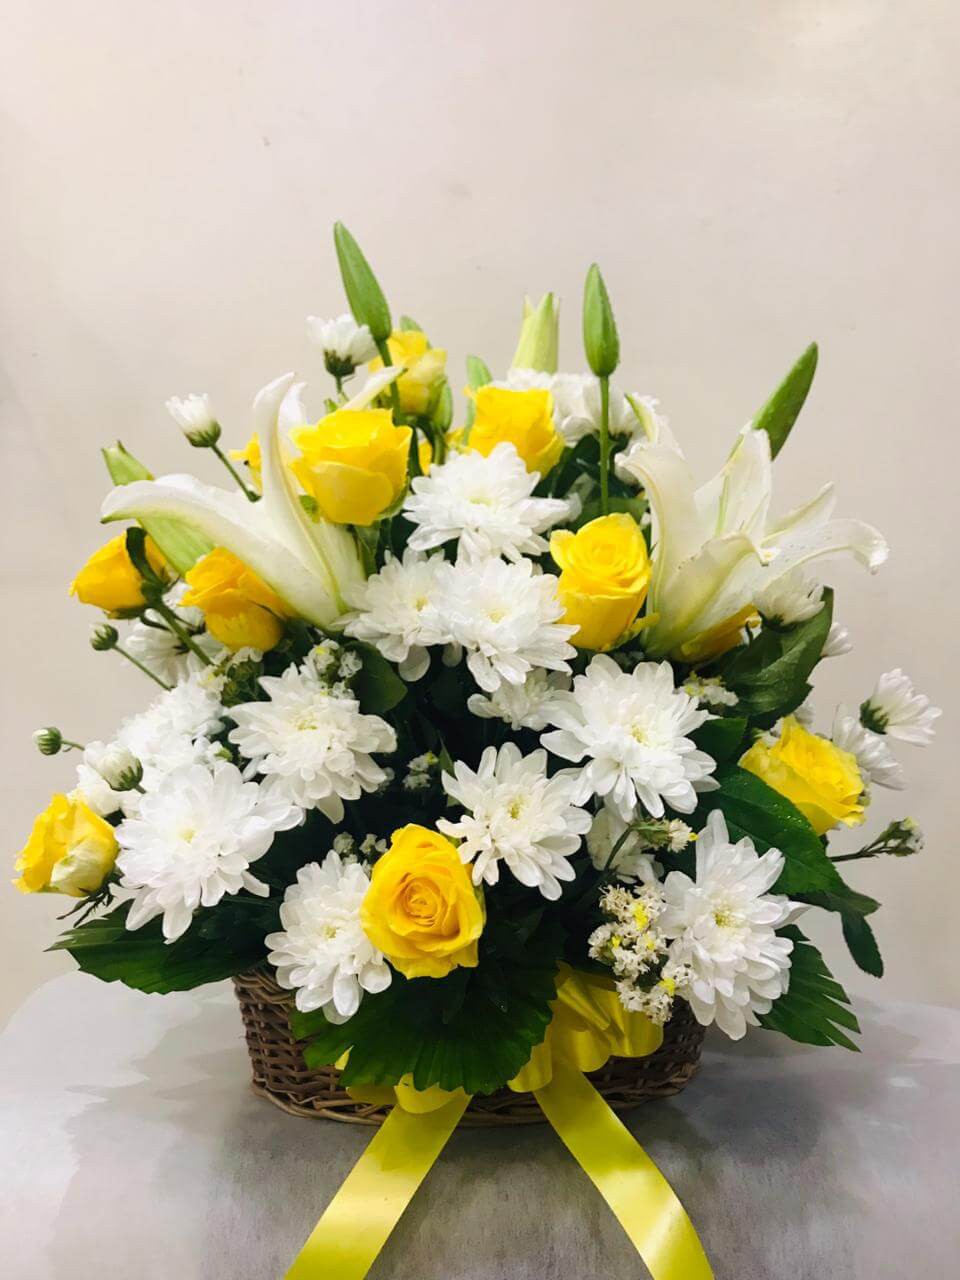 Say Hello! 30 Yellow Roses with Chrysanthemums and Basket